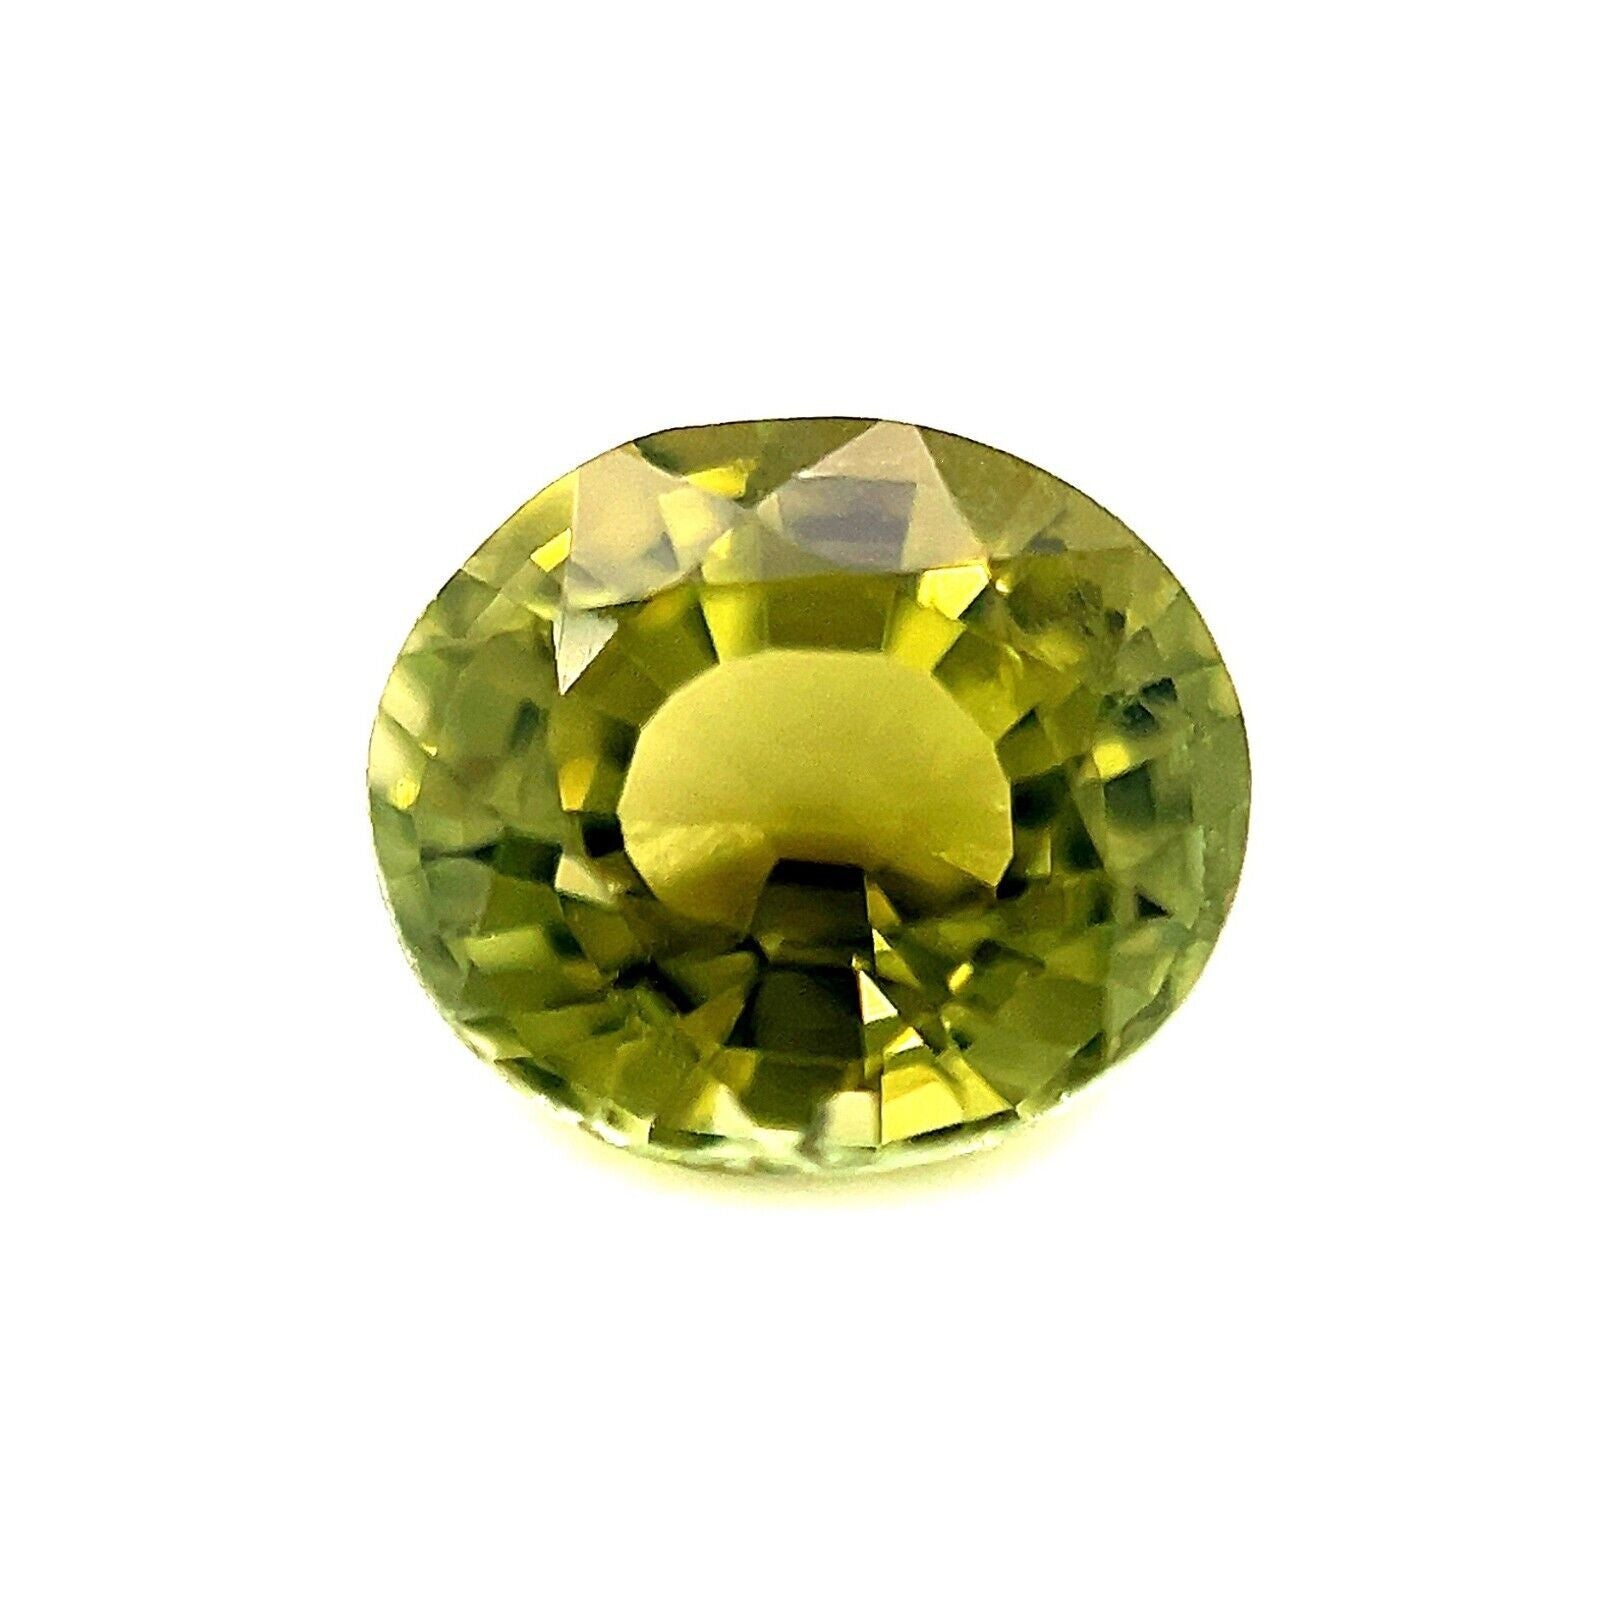 1.80ct Fine Olive Green Tourmaline Oval Cut Loose Gemstone 8x6.8mm For Sale